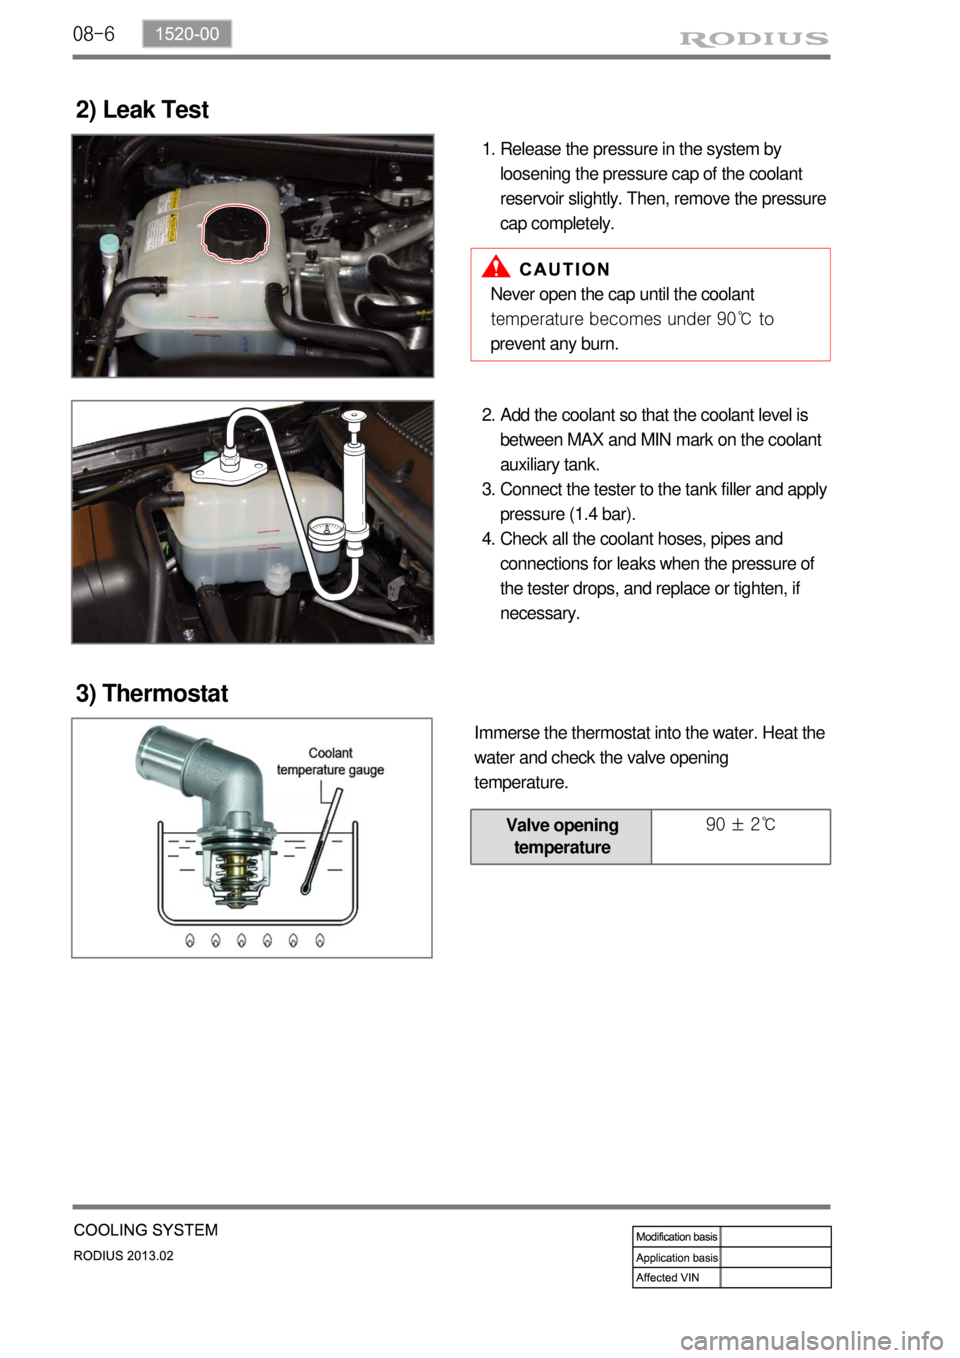 SSANGYONG TURISMO 2013  Service Manual 08-6
2) Leak Test
Release the pressure in the system by 
loosening the pressure cap of the coolant 
reservoir slightly. Then, remove the pressure 
cap completely. 1.
Never open the cap until the coola